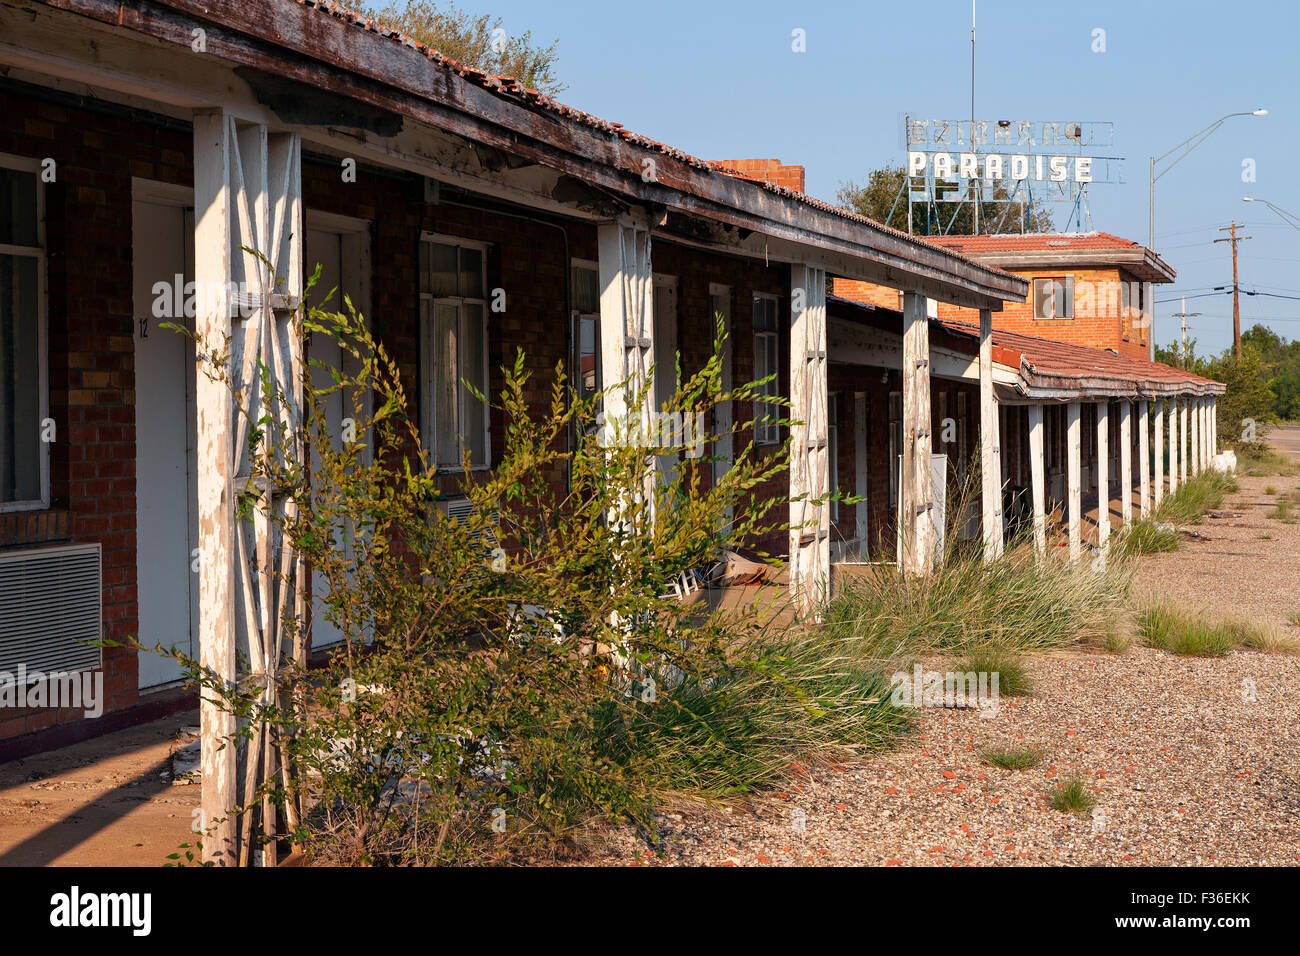 The abandoned Paradise Motel along Route 66 on the west side of Tucumcari, New Mexico. Stock Photo